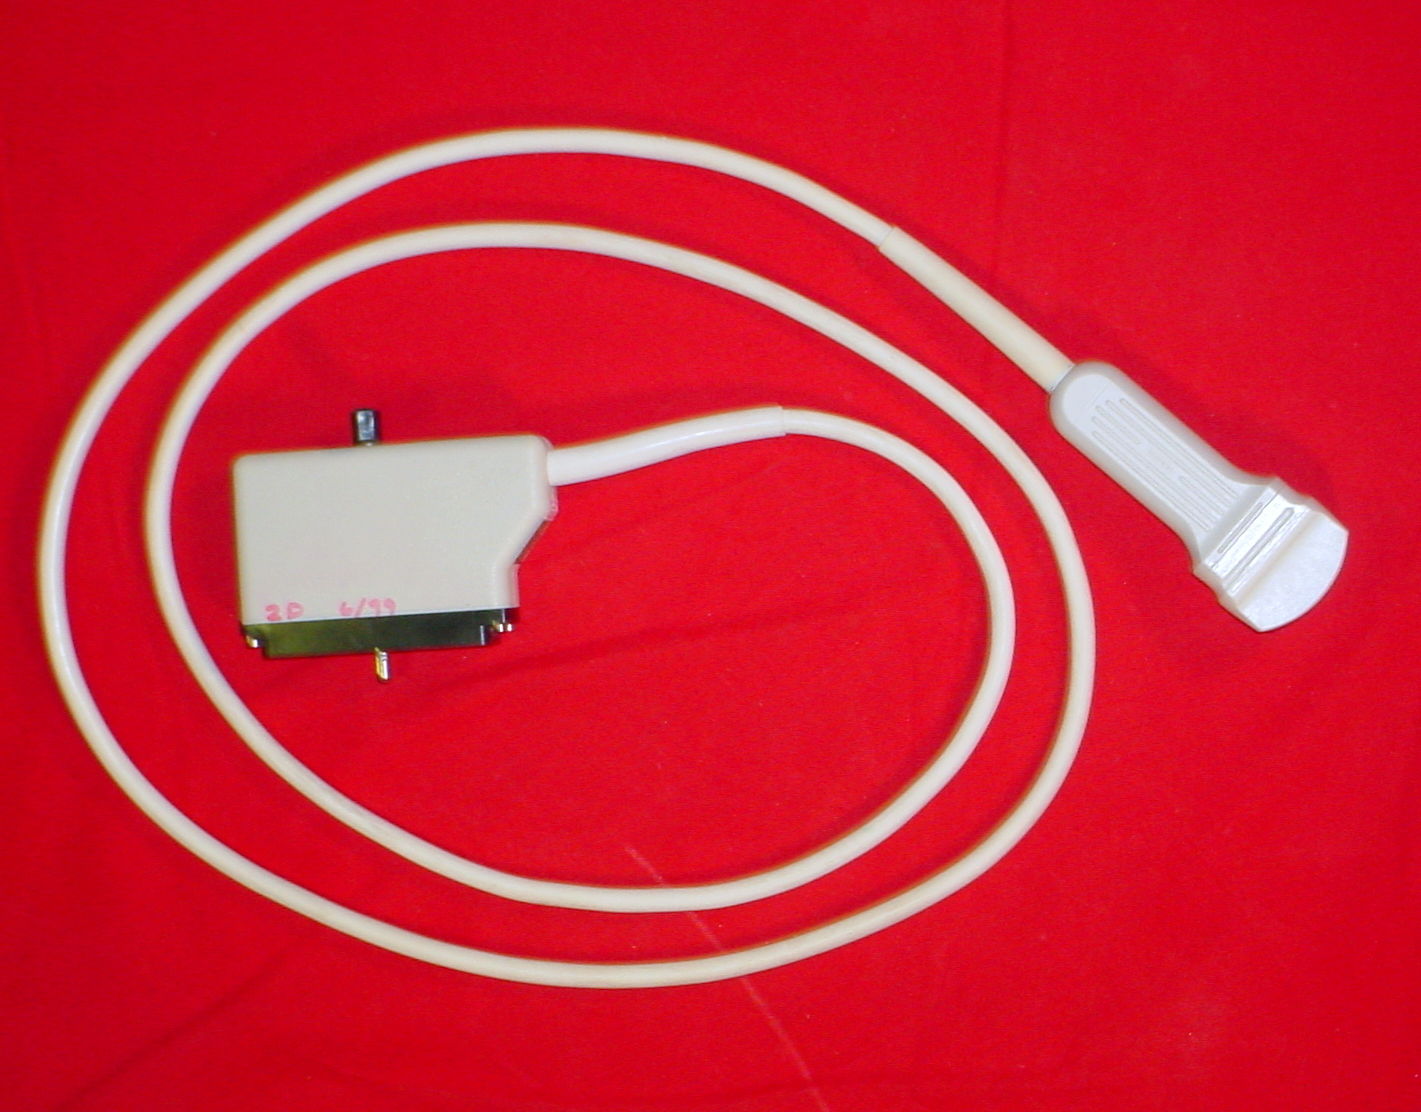 overhead shot of probe red background